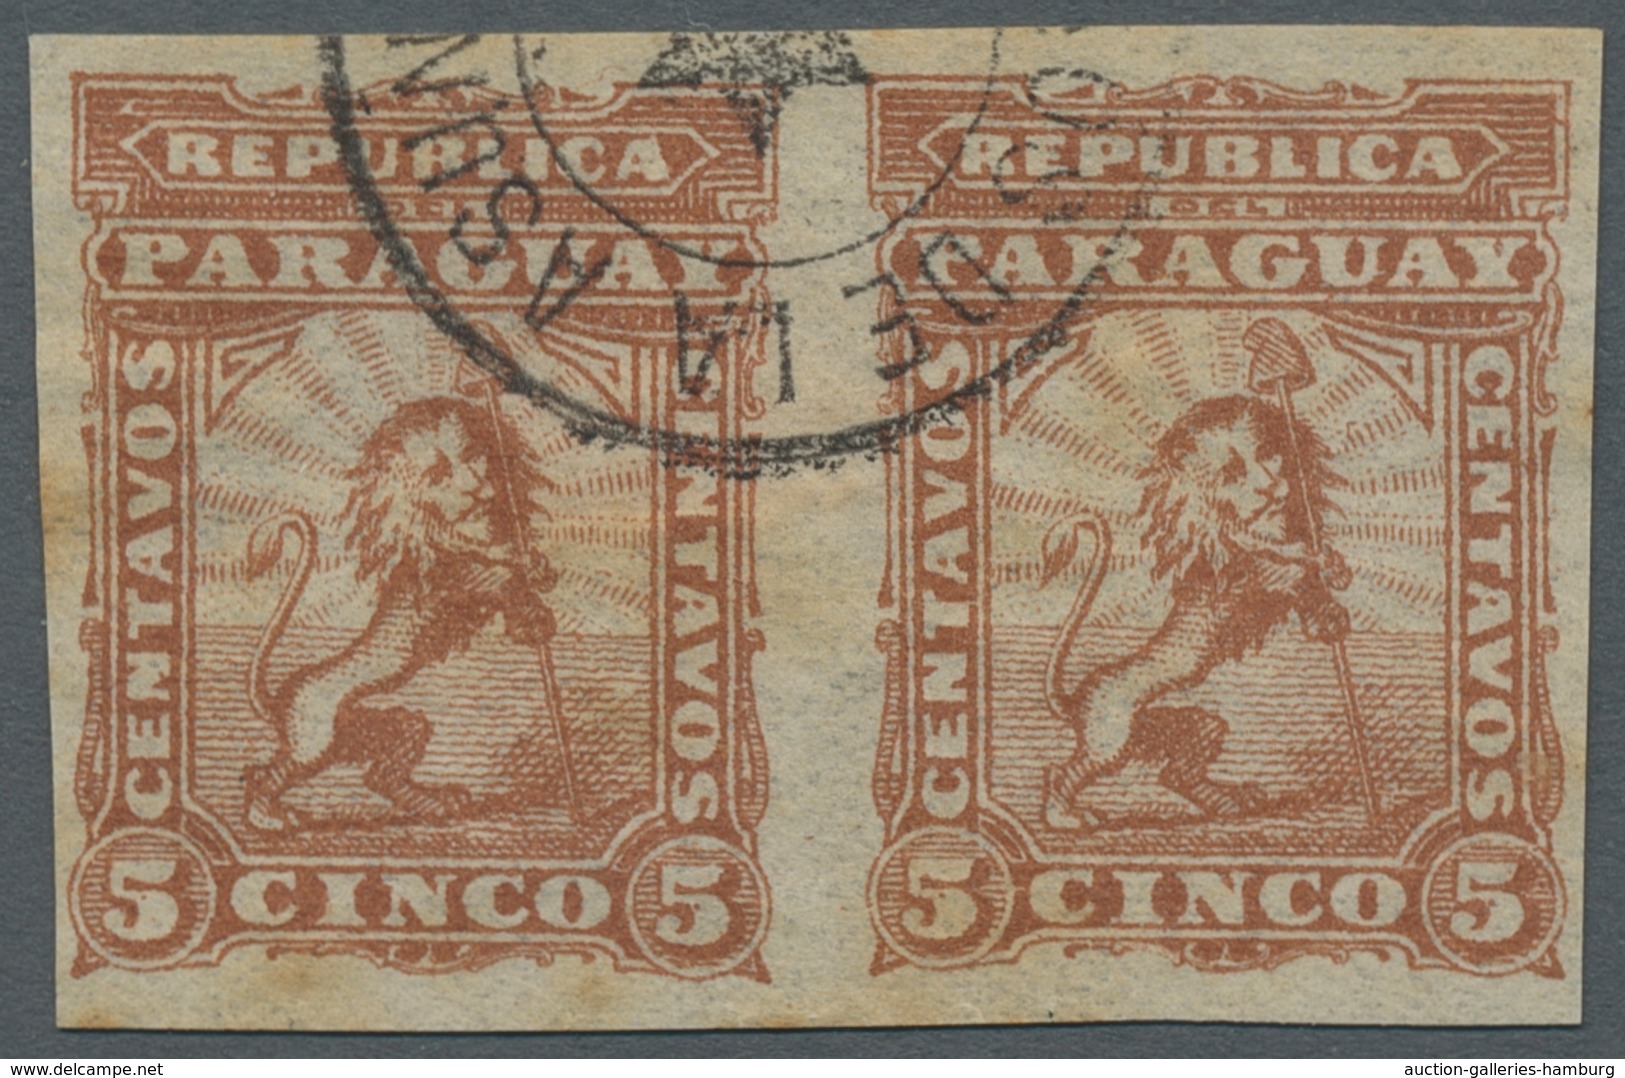 Paraguay: 1879-81, Second "lion" Type, Small Selection Of Colour Proofs (26), Some Units Incl. 5c. H - Paraguay